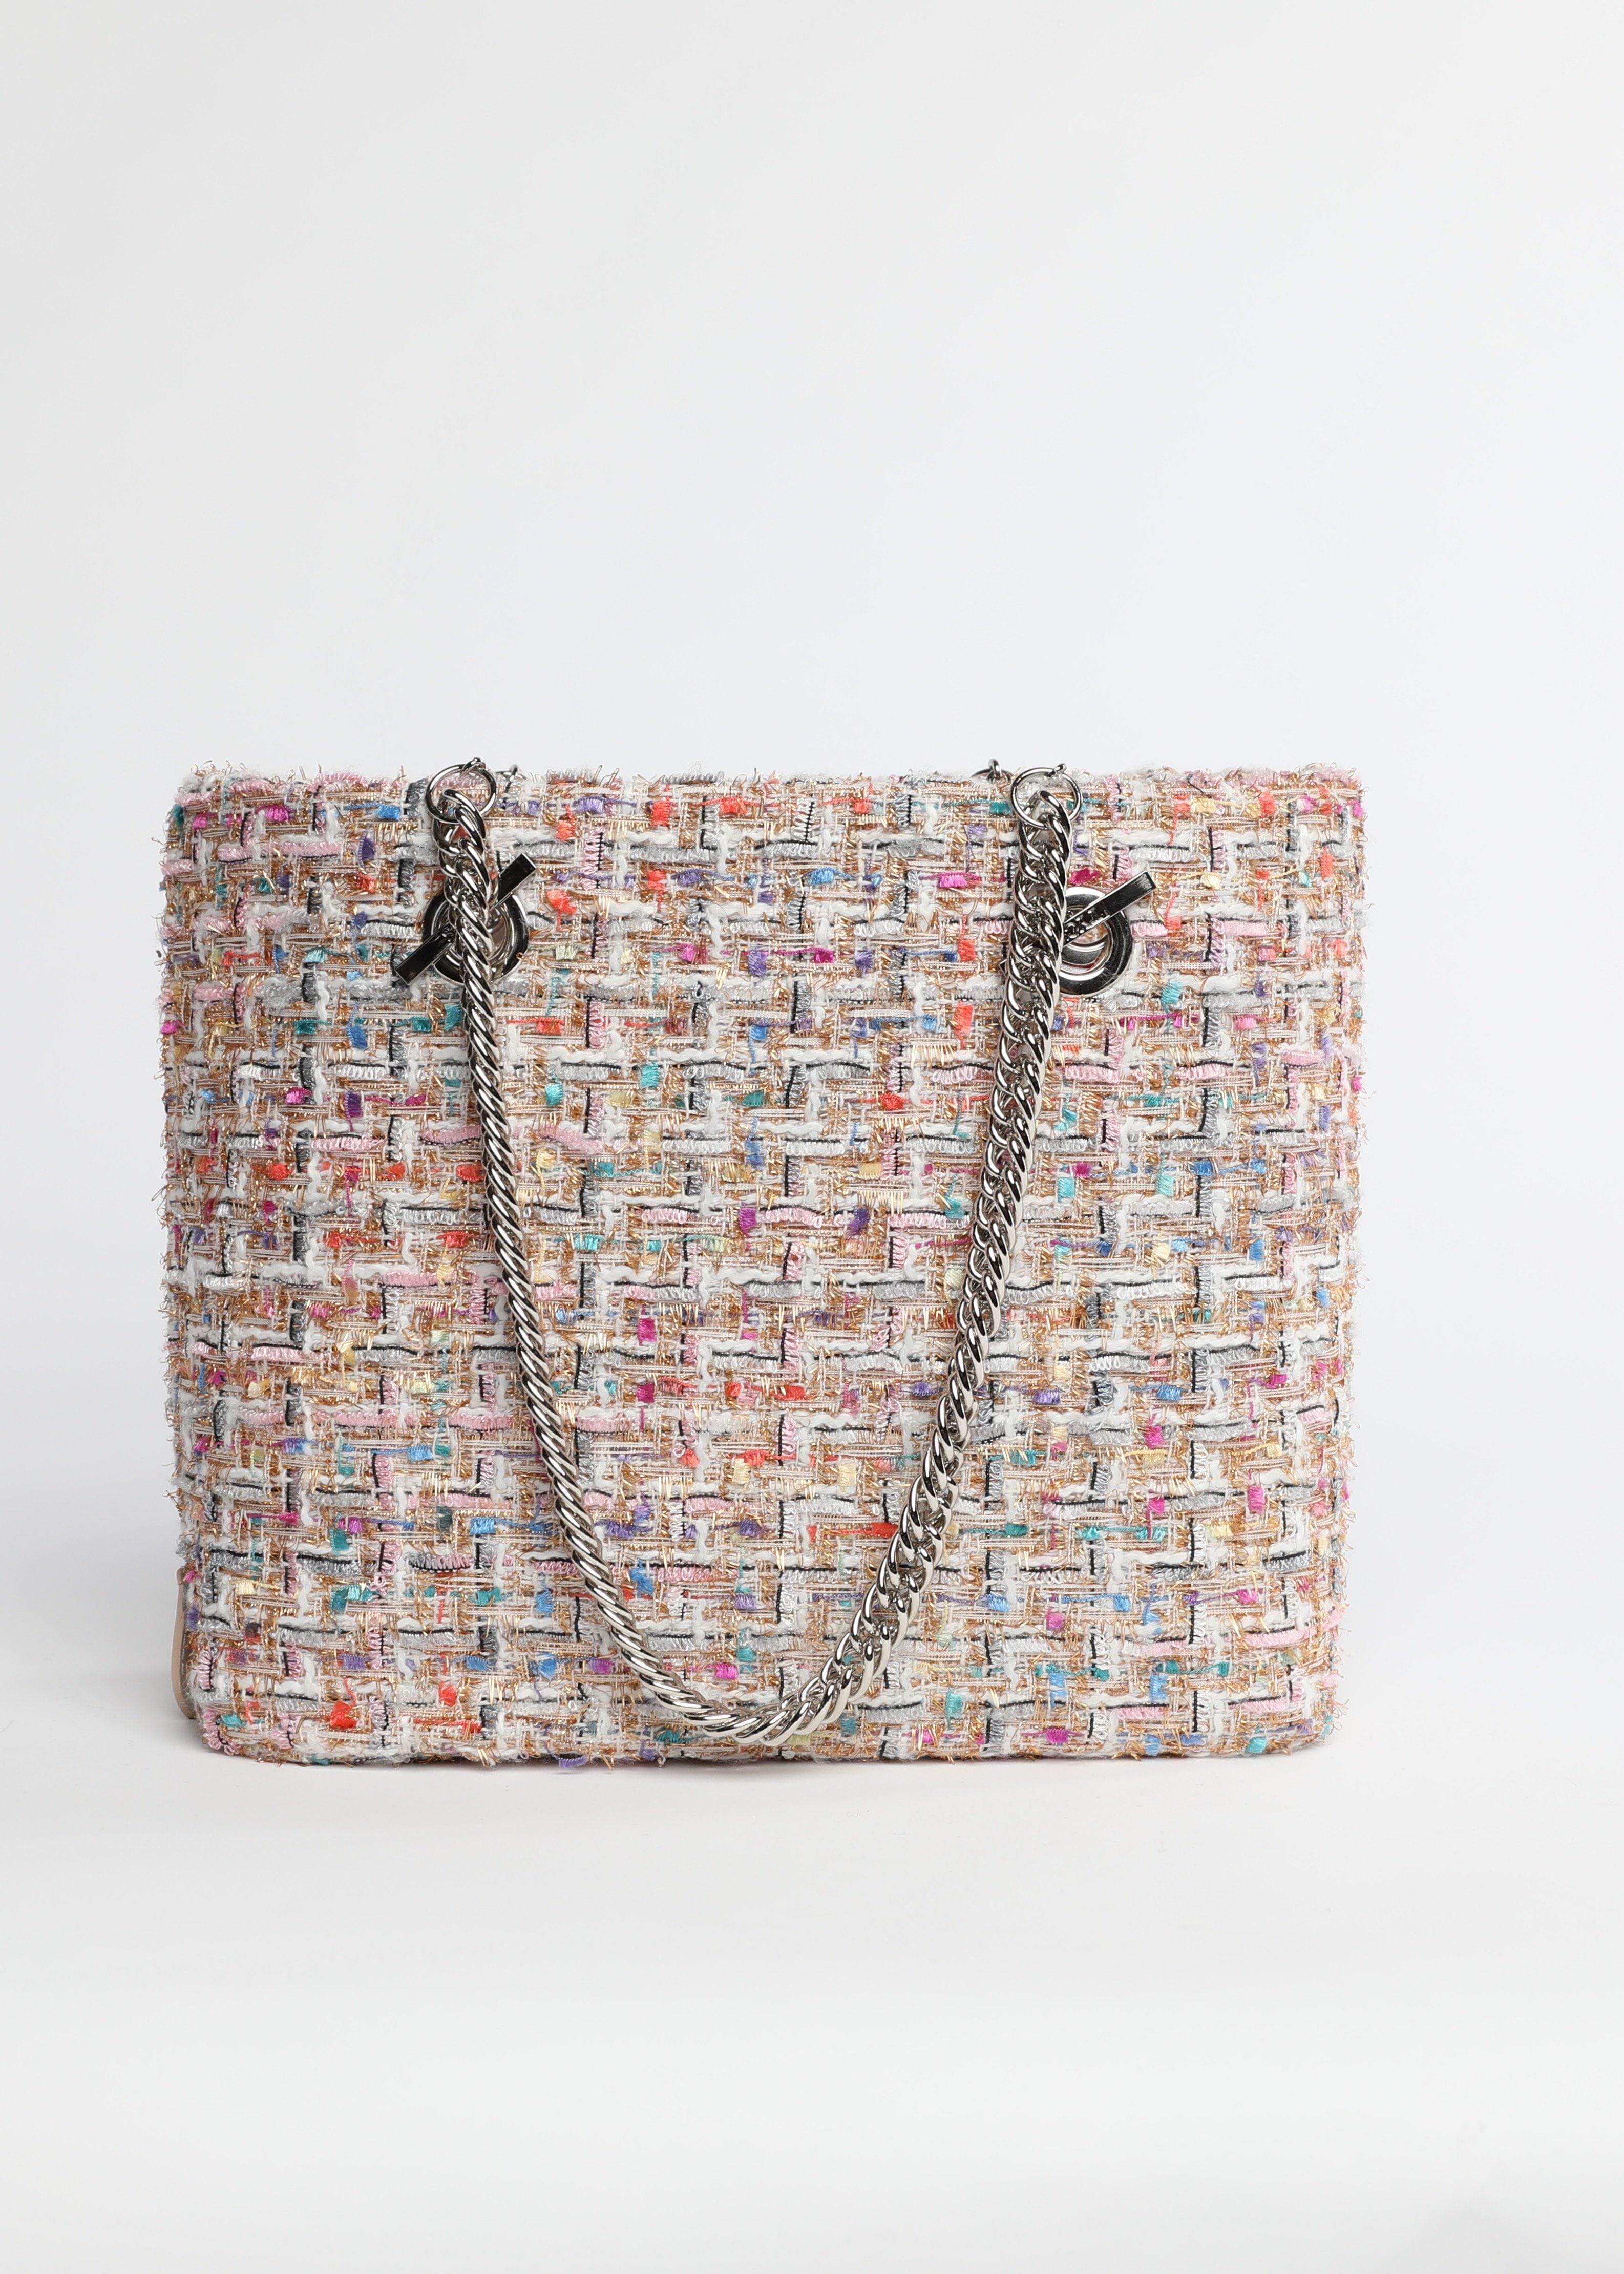 TailorYourChoiceS BAGS Abree Spring Interchangeable Tweed Fabric Medium Bag